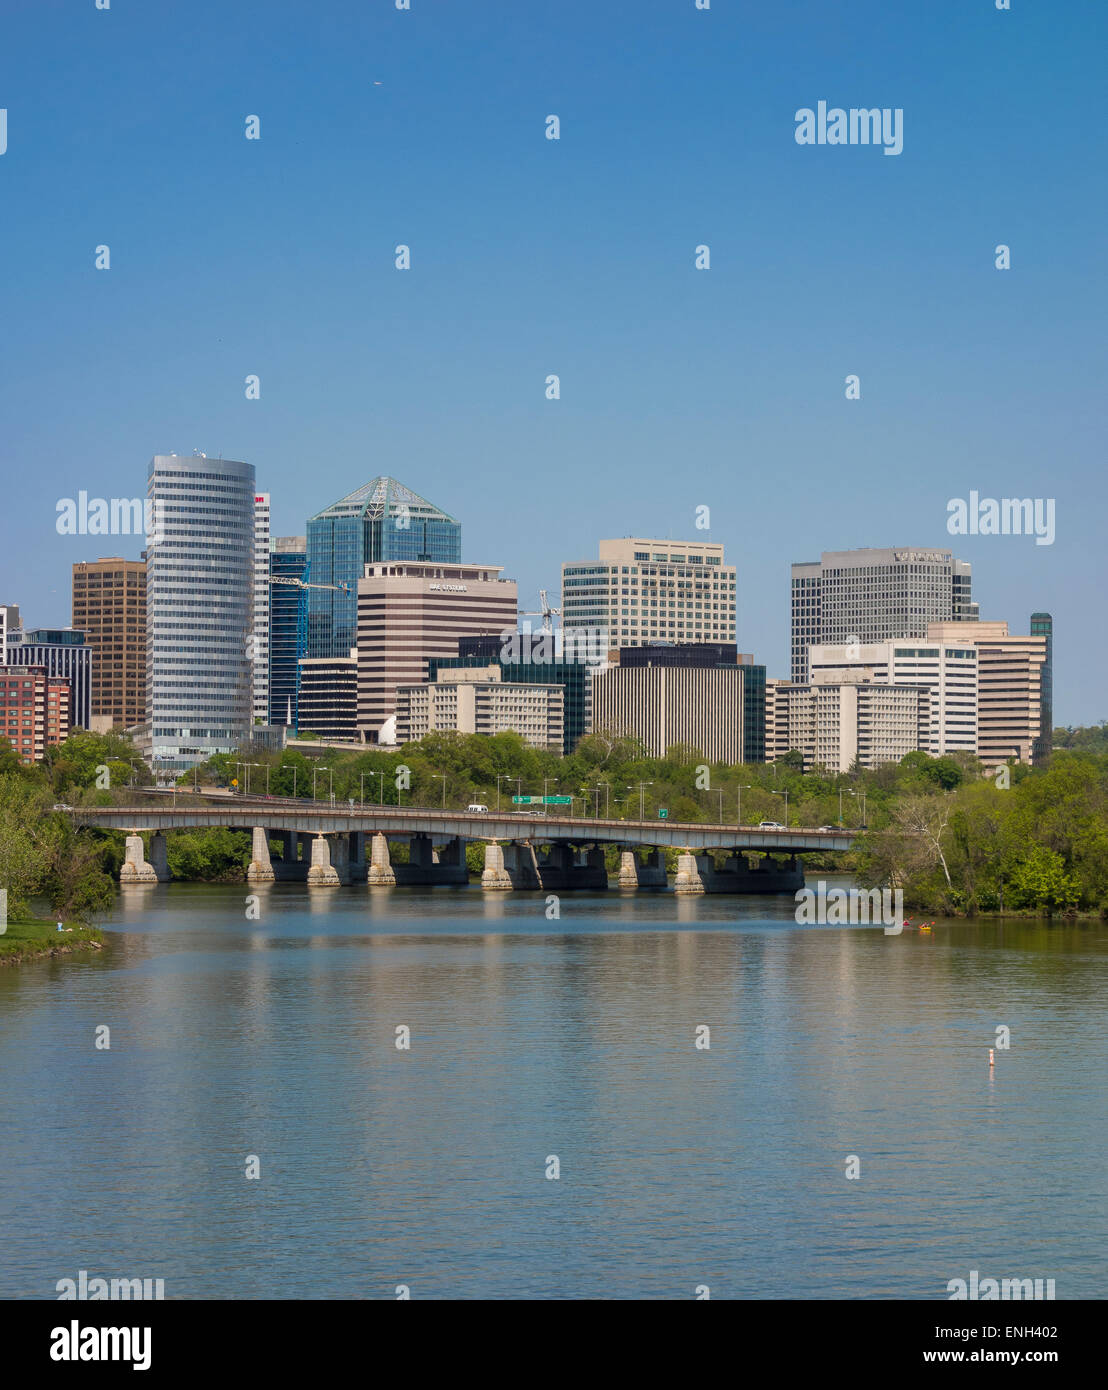 ROSSLYN, VIRGINIA, USA - Skyline of Rossyln and Potomac River, with Roosevelt Bridge. Stock Photo